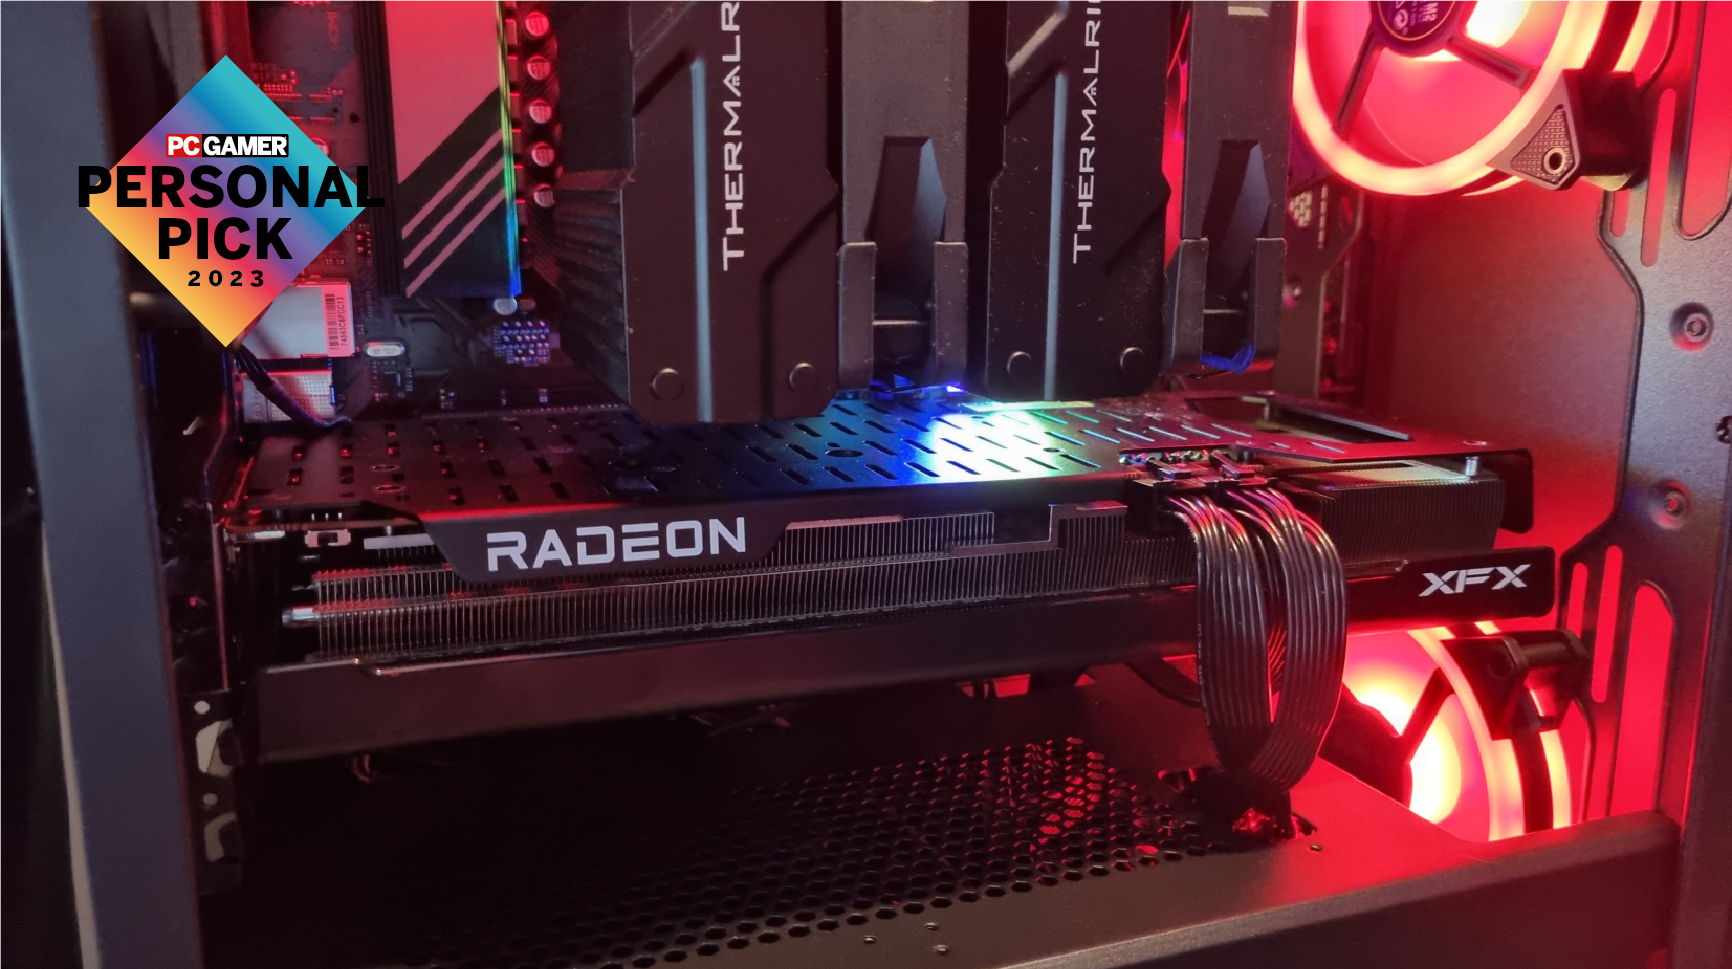 The AMD RX 7800 XT might not have set the world on fire this year, but for me it’s been nothing but a pleasure